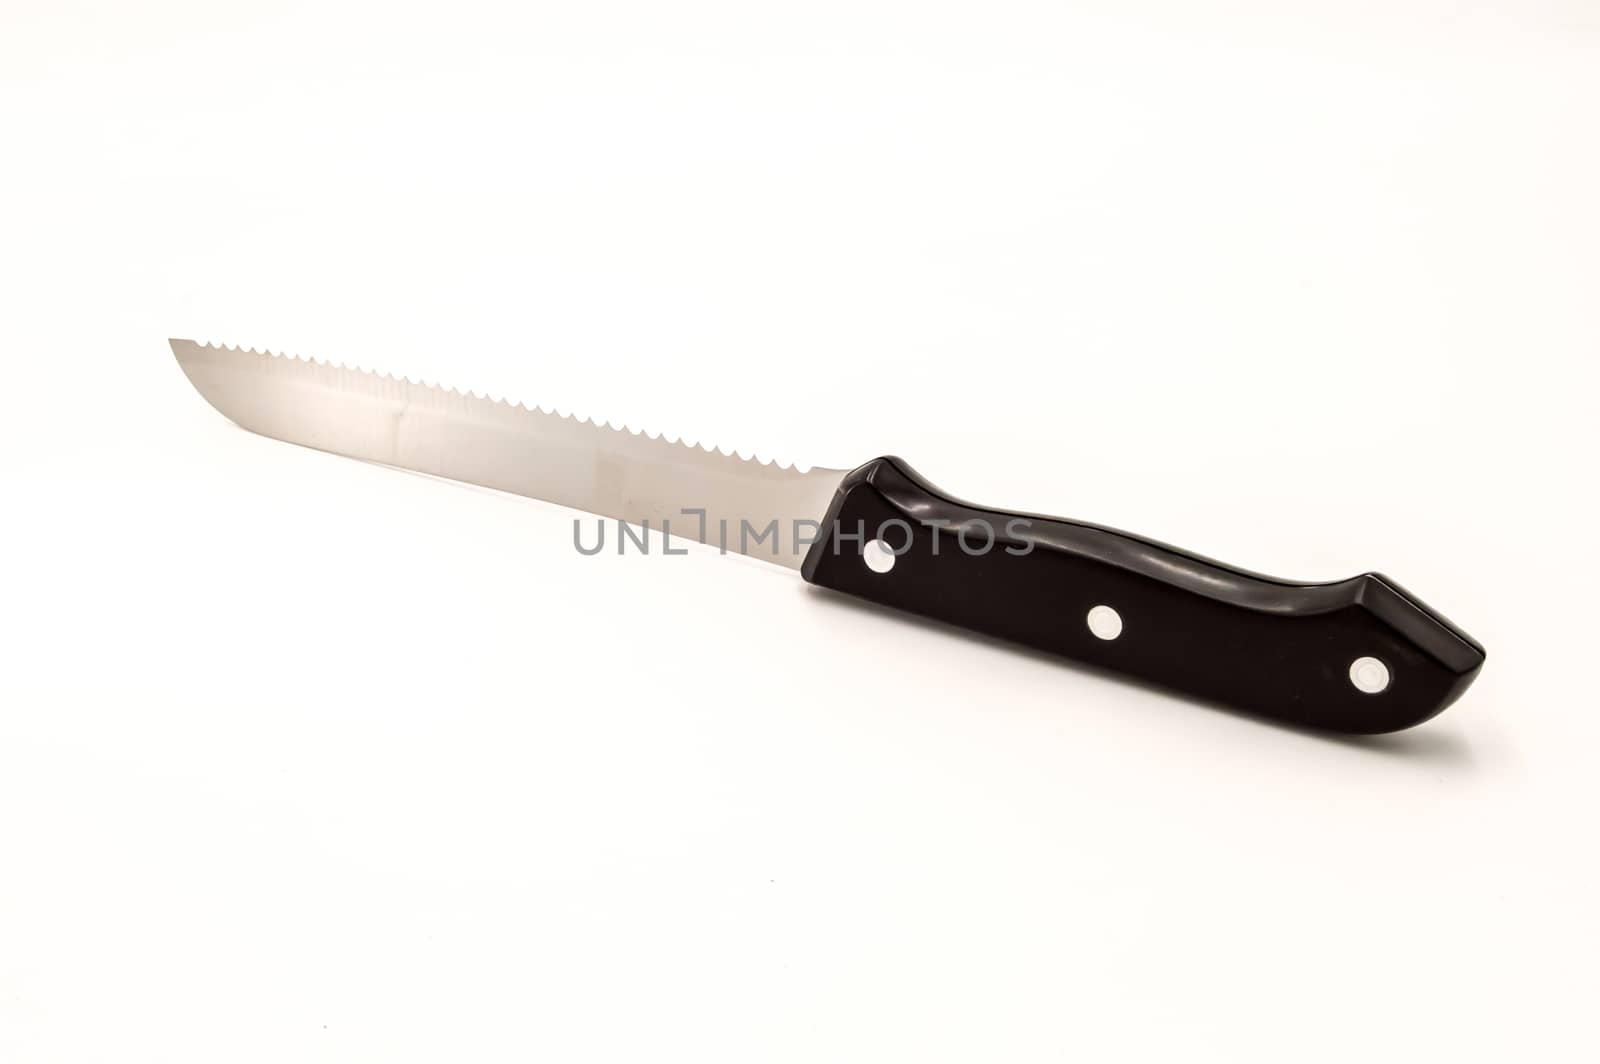 Chromium sawtooth knife with a black handle  by Philou1000